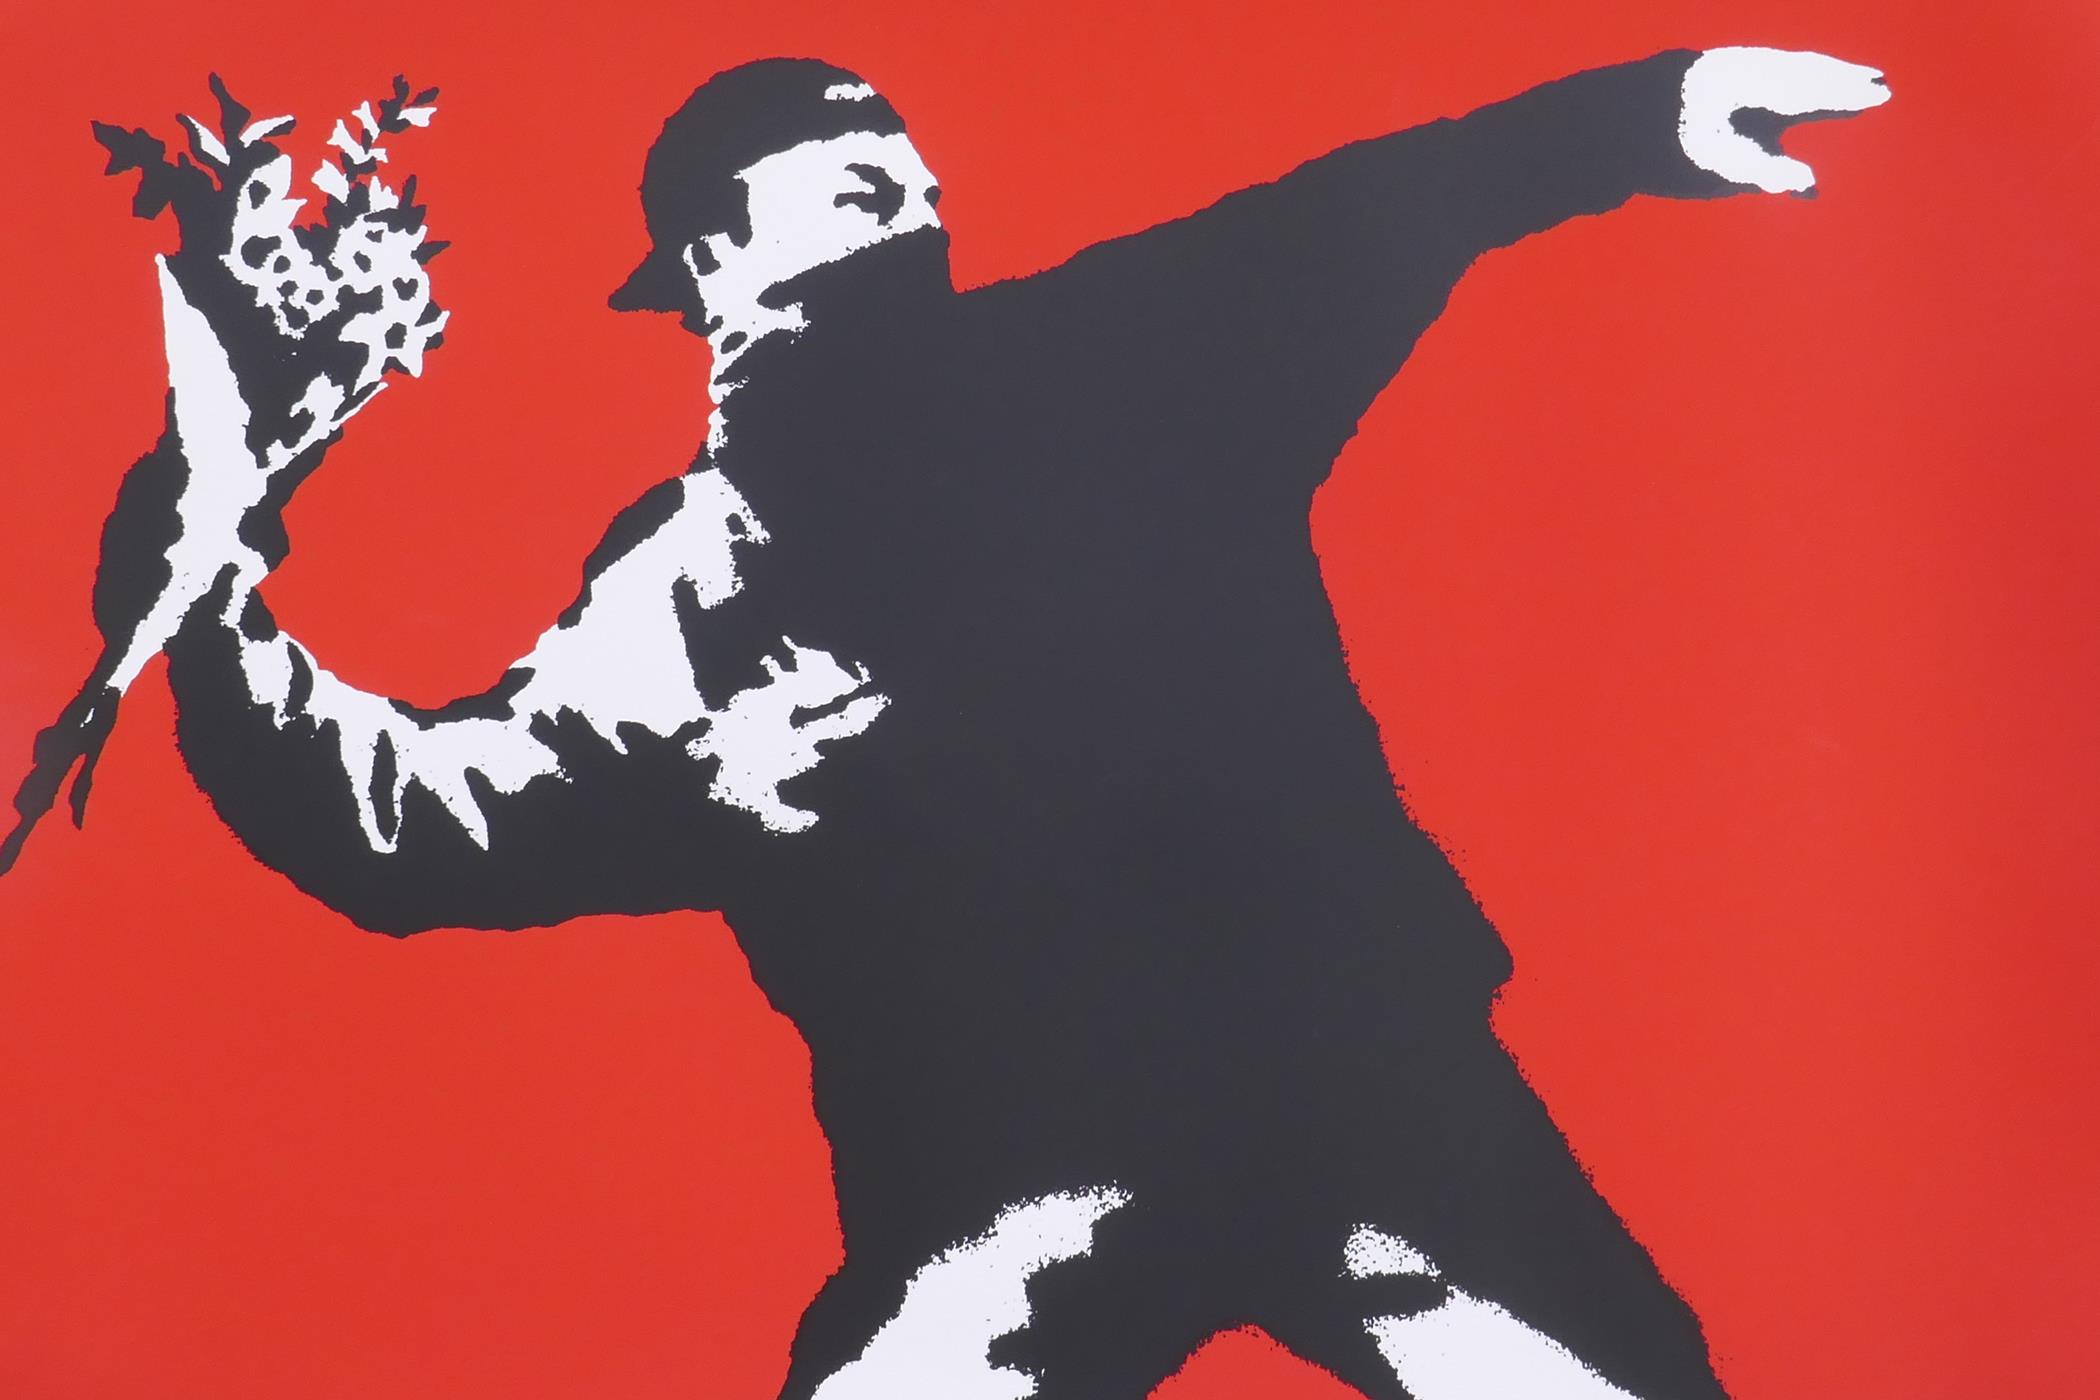 After Banksy, Love is in the Air (Flower Thrower), limited edition copy screen print No. 420/500, by